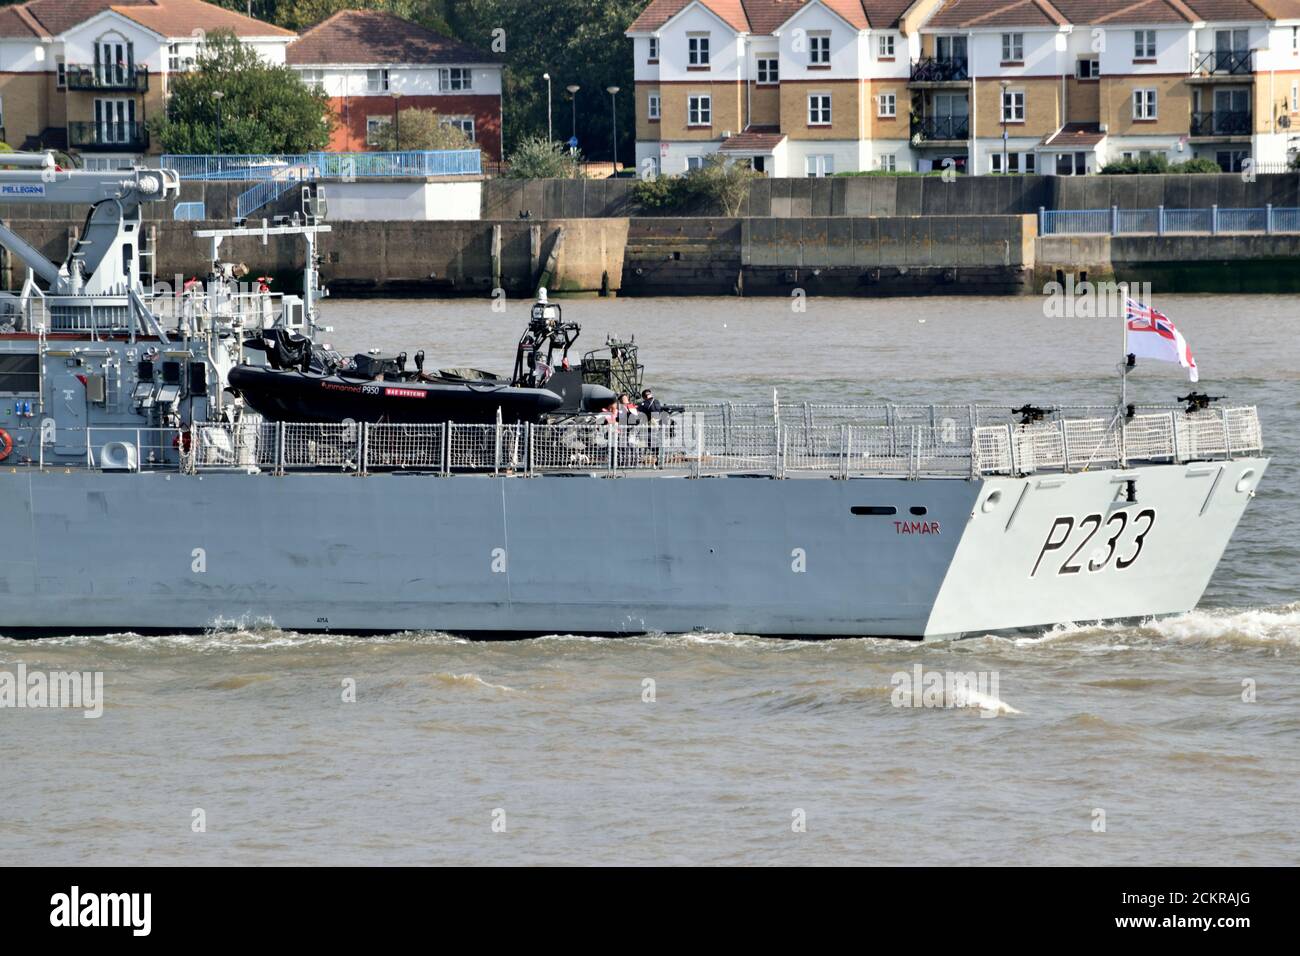 HMS Tamar, a Batch 2 River-class offshore patrol vessel of the Royal Navy, heads down the River Thames after paying its first visit to London Stock Photo